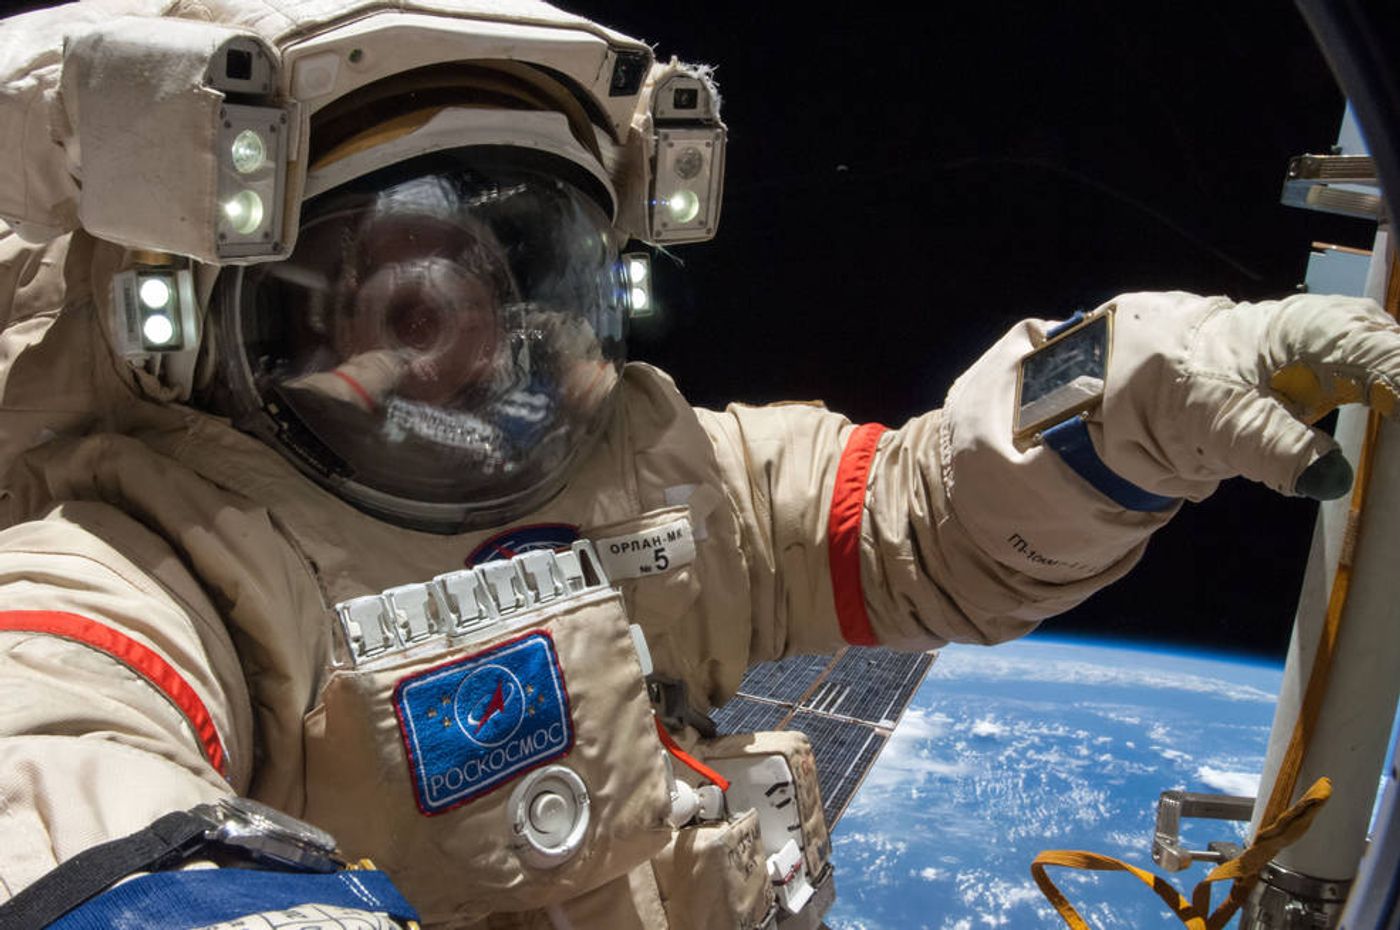 Two Russian cosmonauts will perform a spacewalk on the International Space Station on Wednesday.